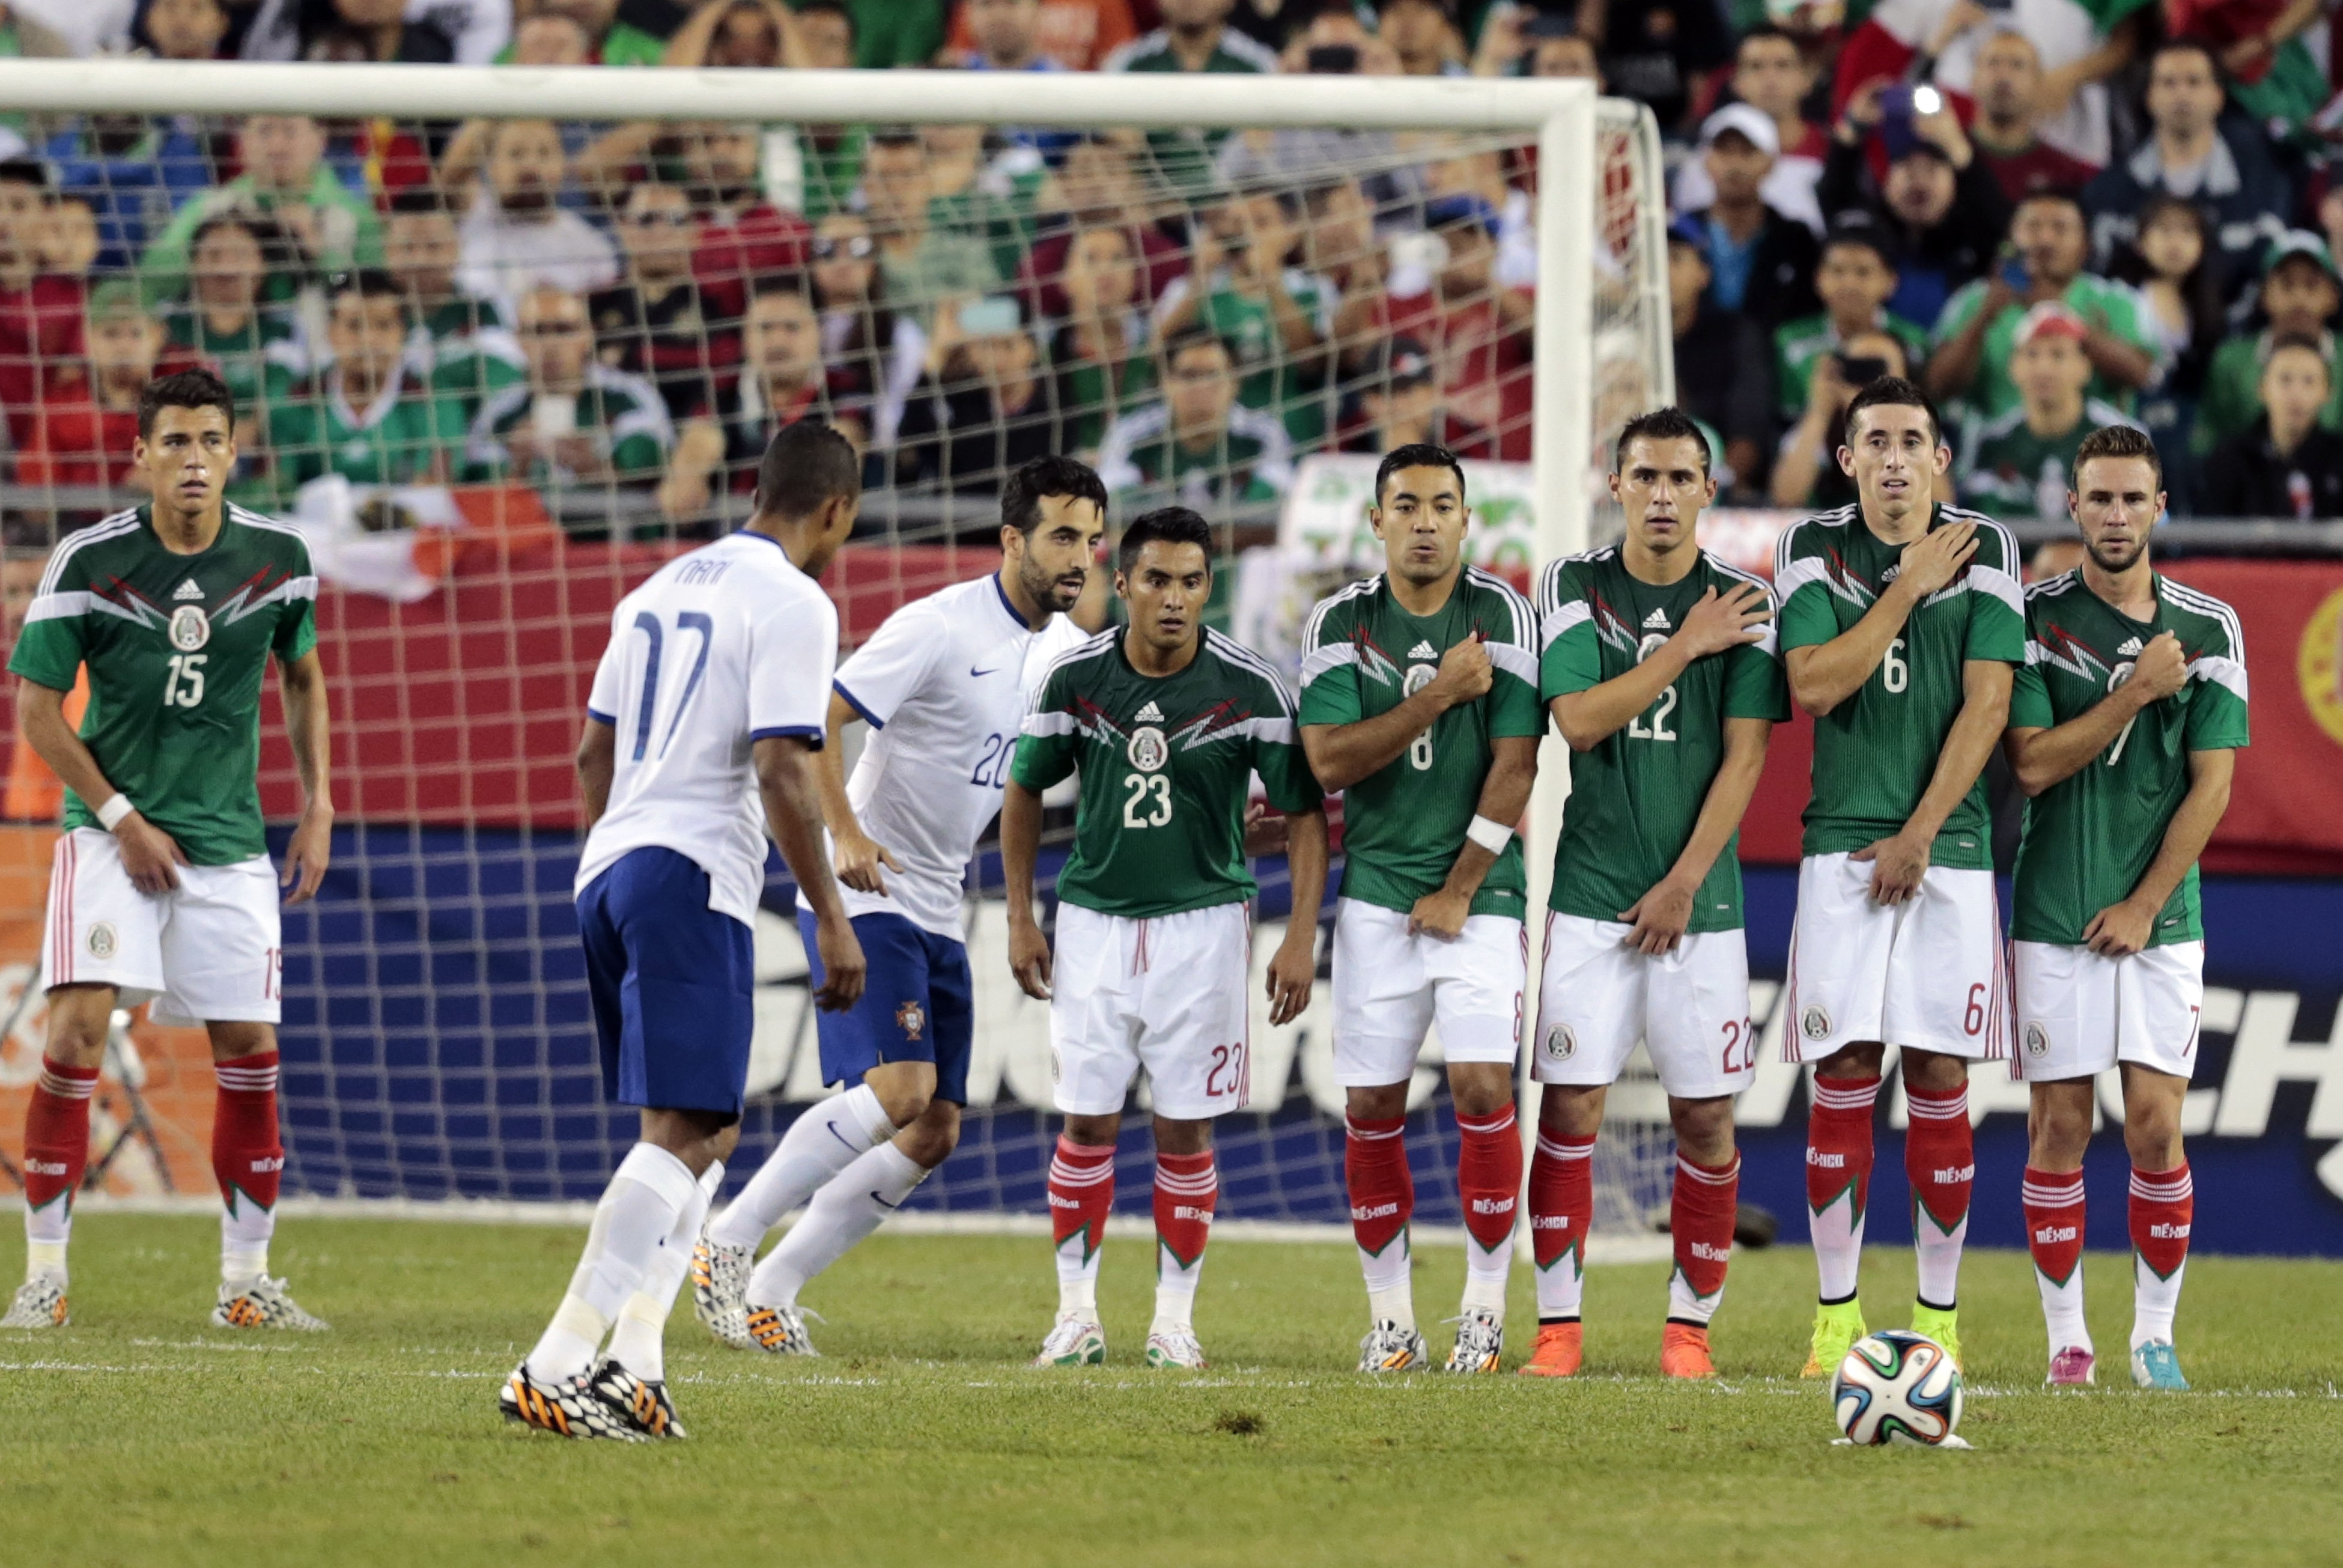 The Mexican wall waits for a free kick from Portugal's Nani (17) during an international friendly before the 2014 World Cup, Foxborough, Mass., June 6, 2014. (Fred Kfoury III—Icon SMI/Corbis)